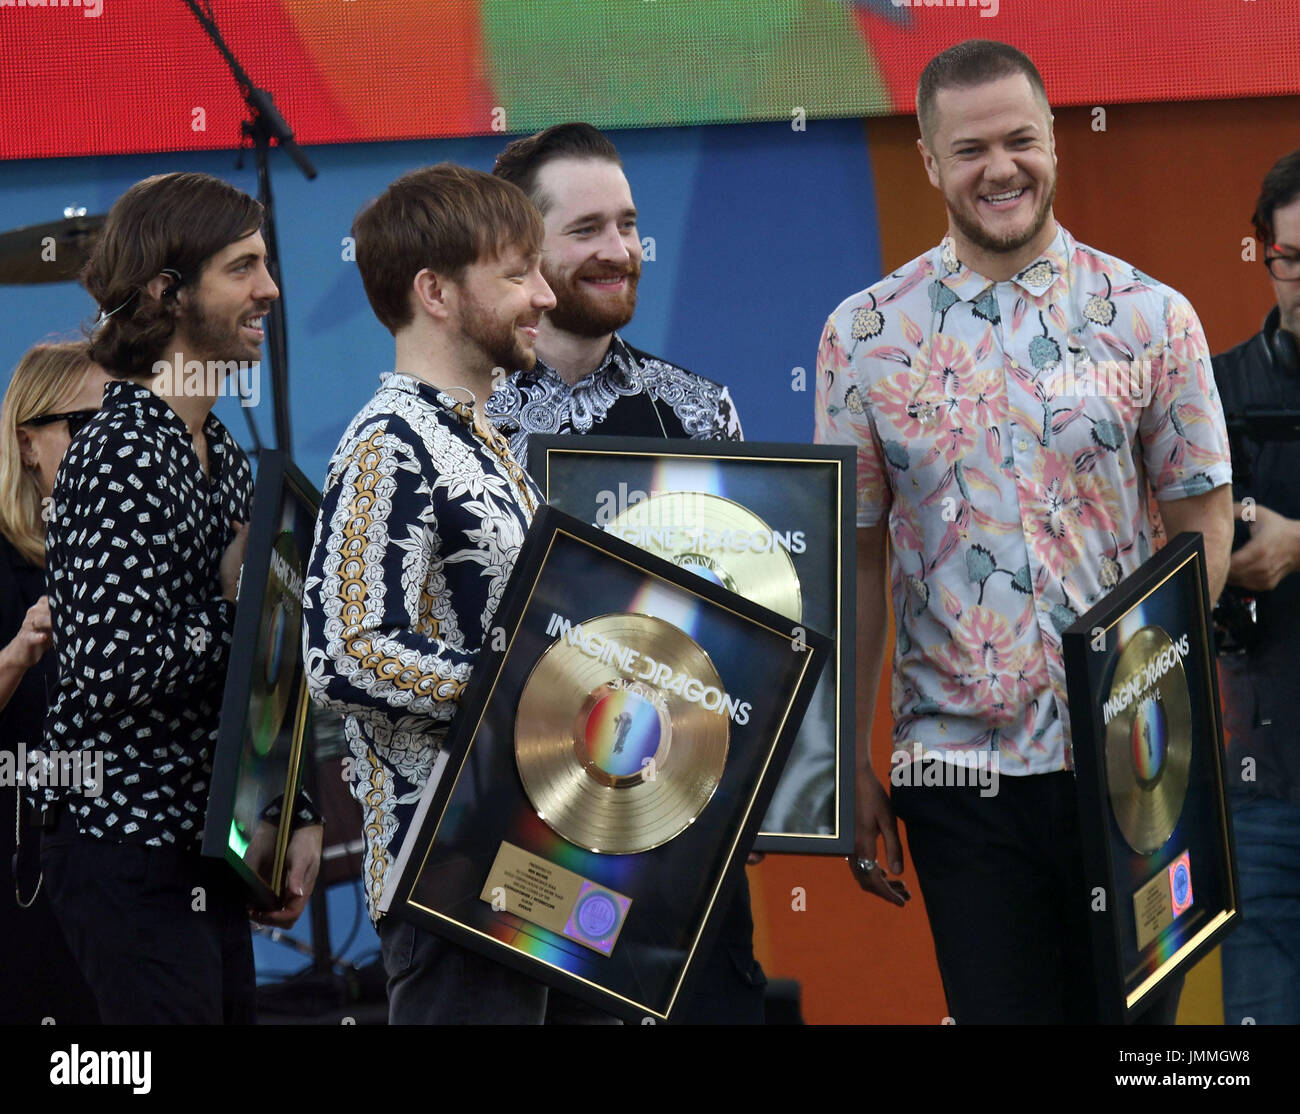 New York, New York, USA. 28th July, 2017. IMAGINE DRAGONS receive gold records awards on 'Good Morning America' held in Central Park. Credit: Nancy Kaszerman/ZUMA Wire/Alamy Live News Stock Photo